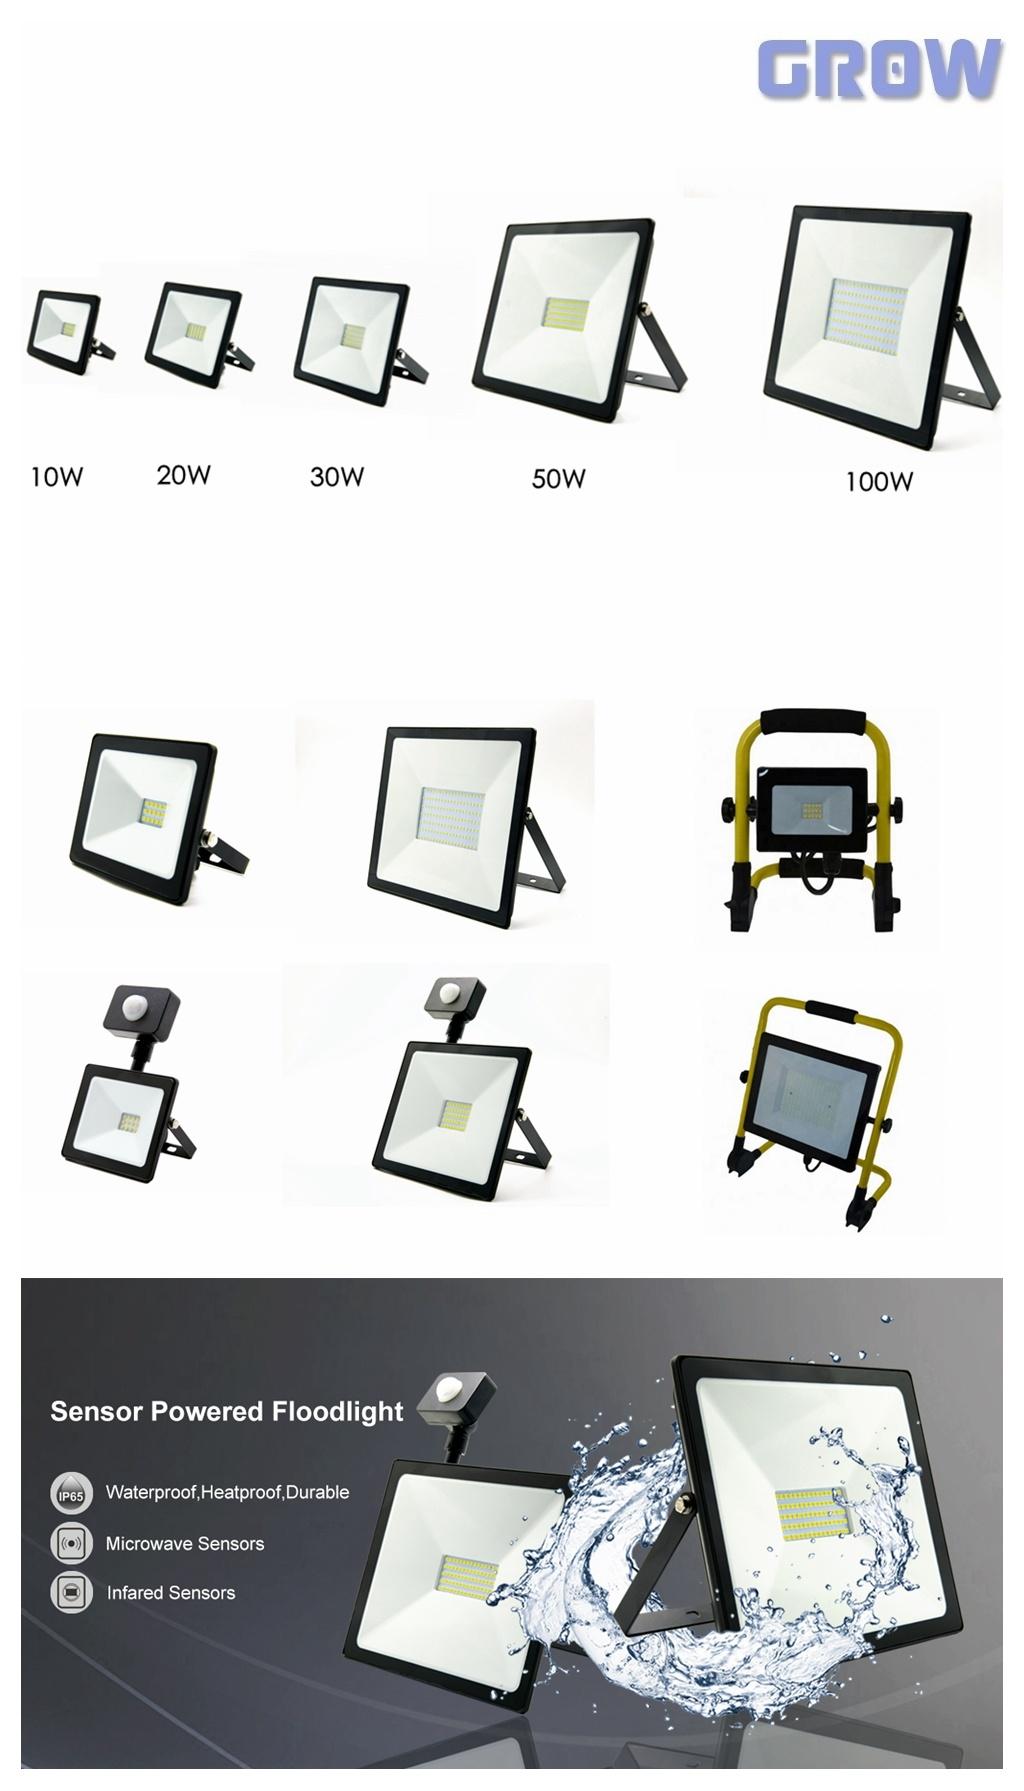 Distributor of LED Floodlight for Outdoor Industrial Flood Lighting with 3years Warranty